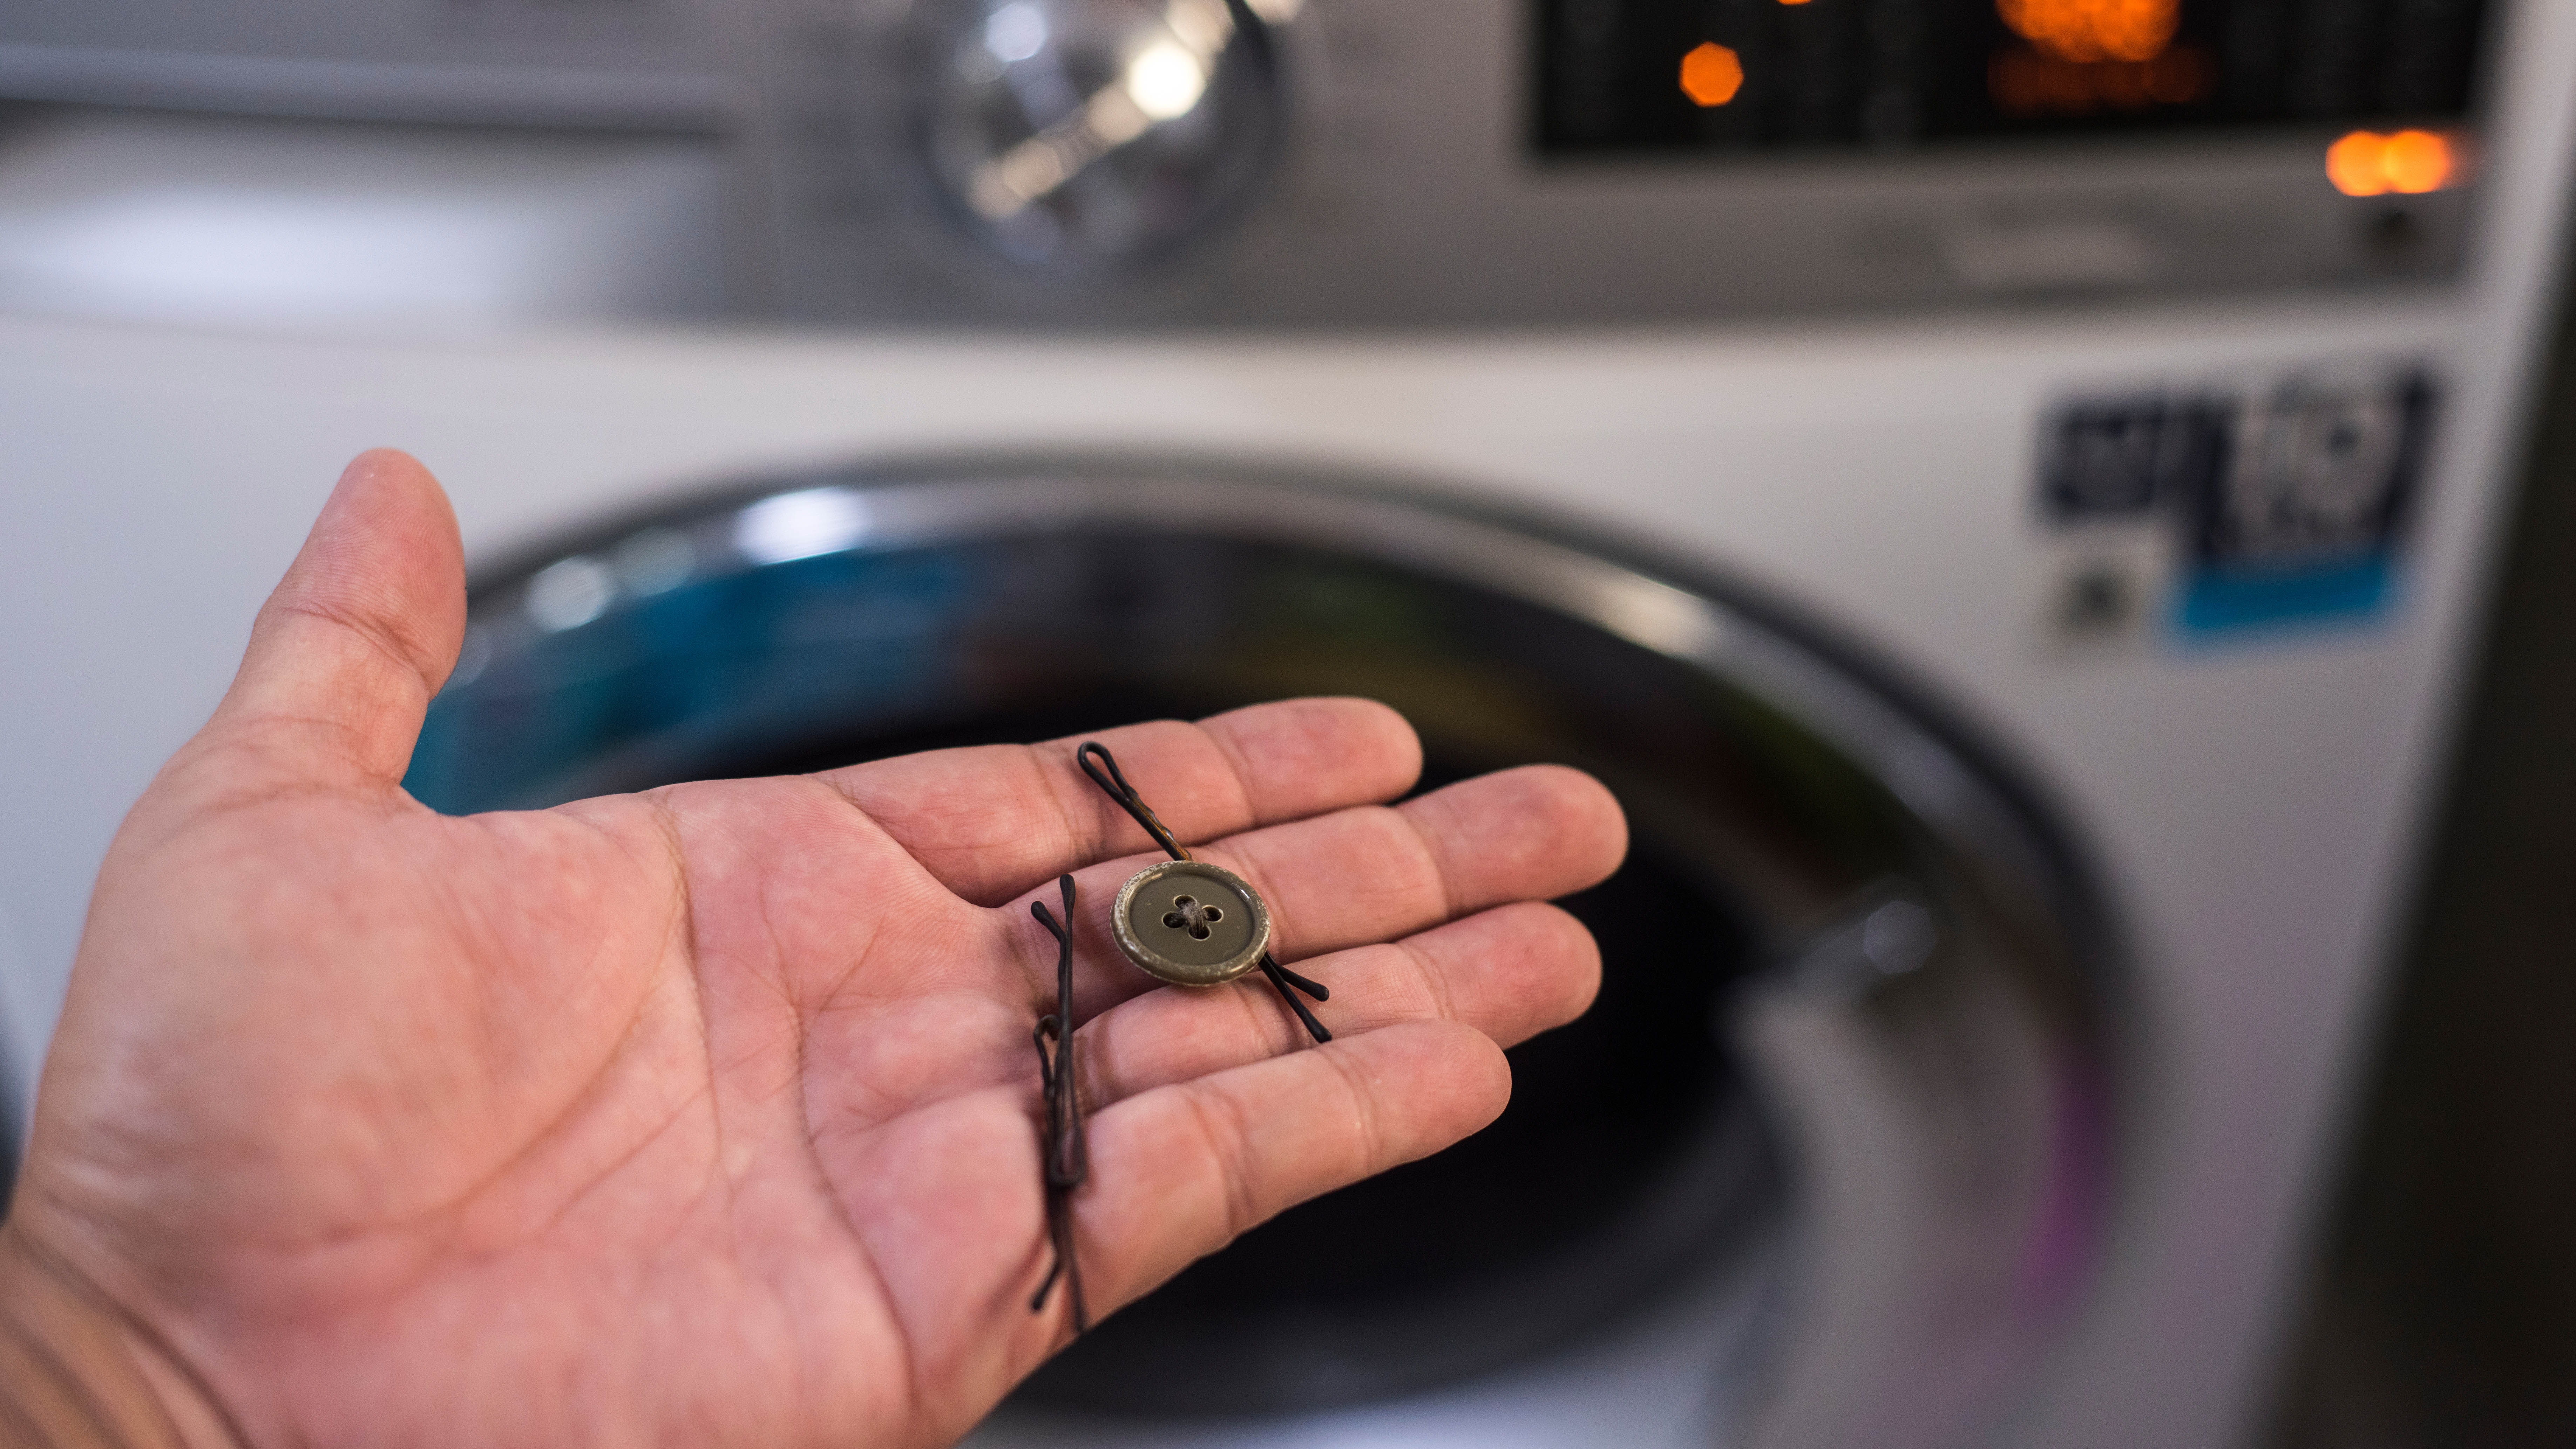 Someone is holding a hairpin and a button in front of the washing machine